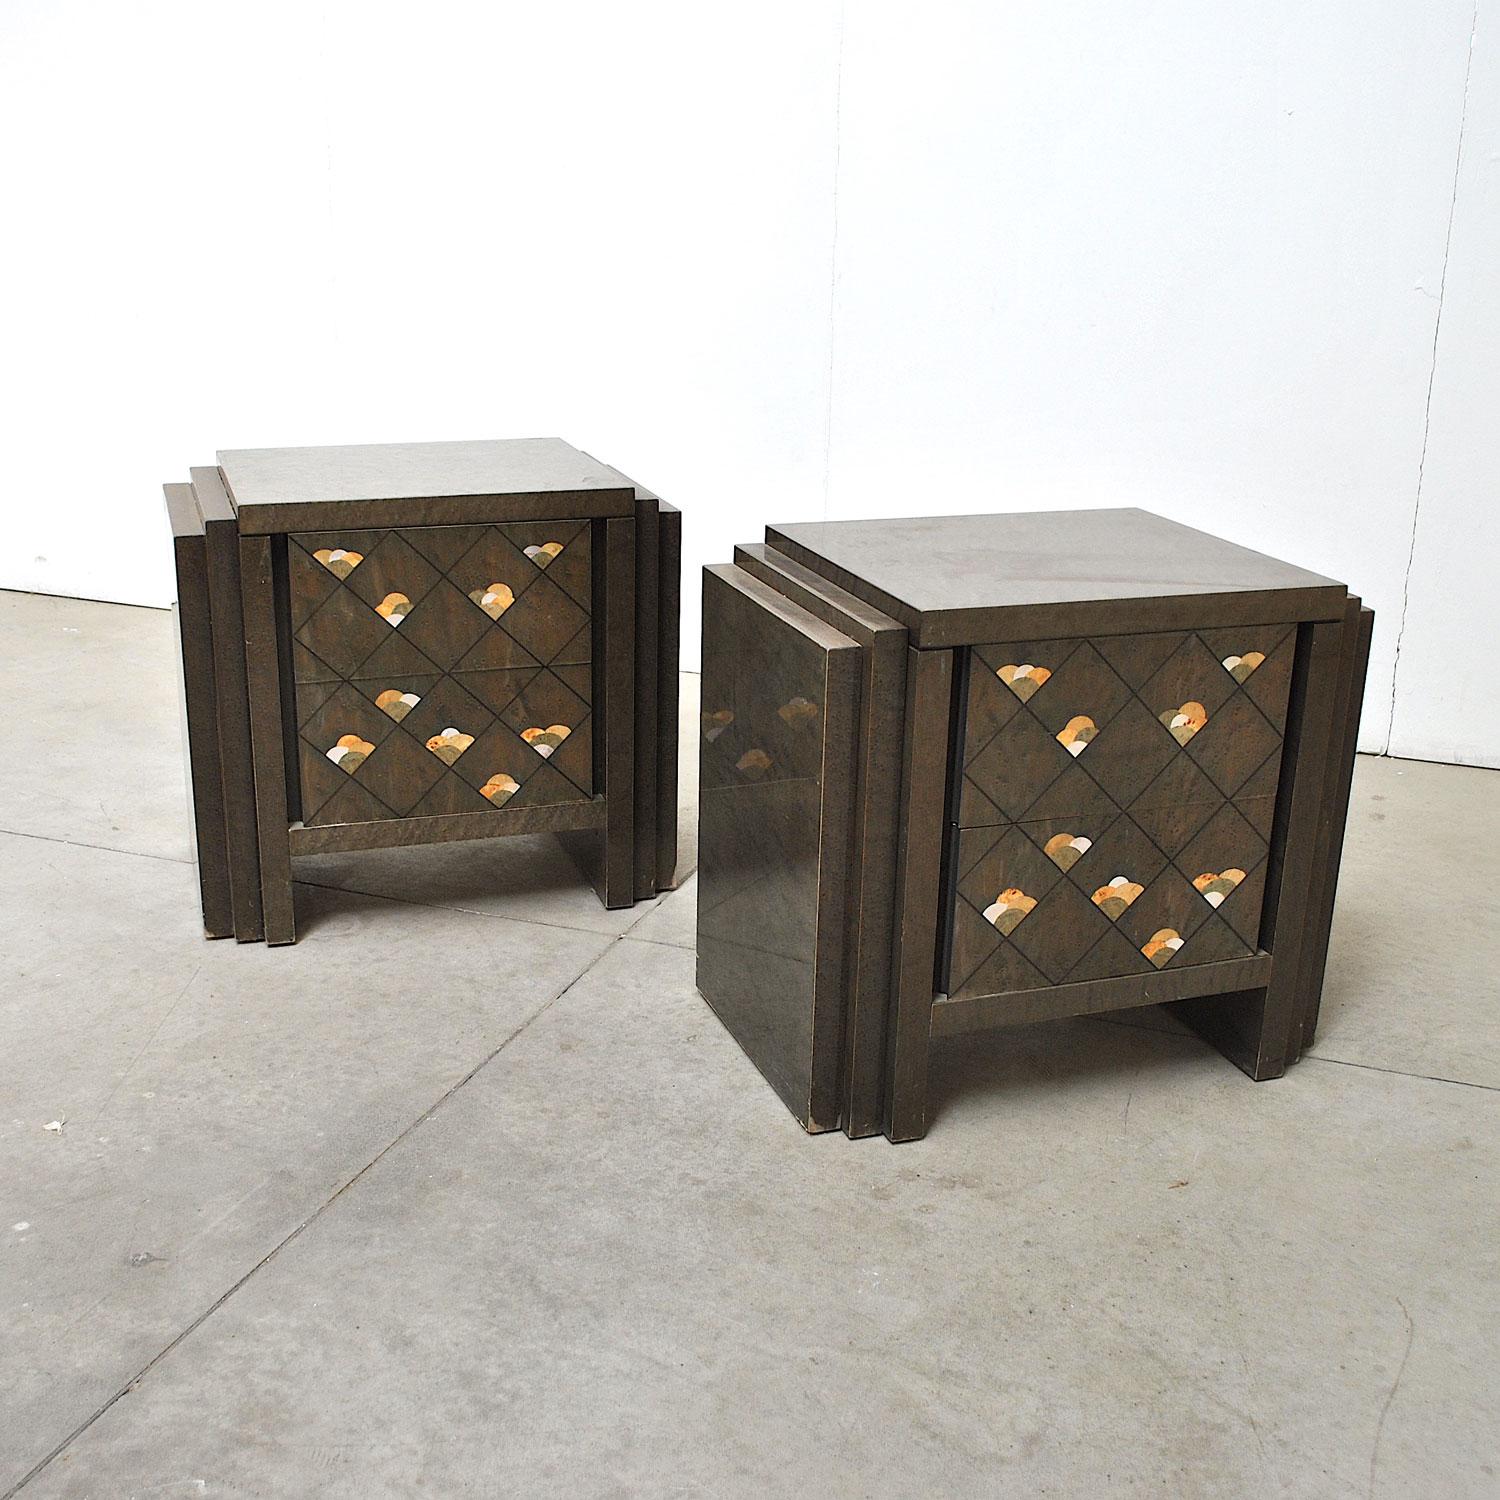 Luciano Frigerio Italian Midcentury Nightstands, Late 1970s For Sale 4